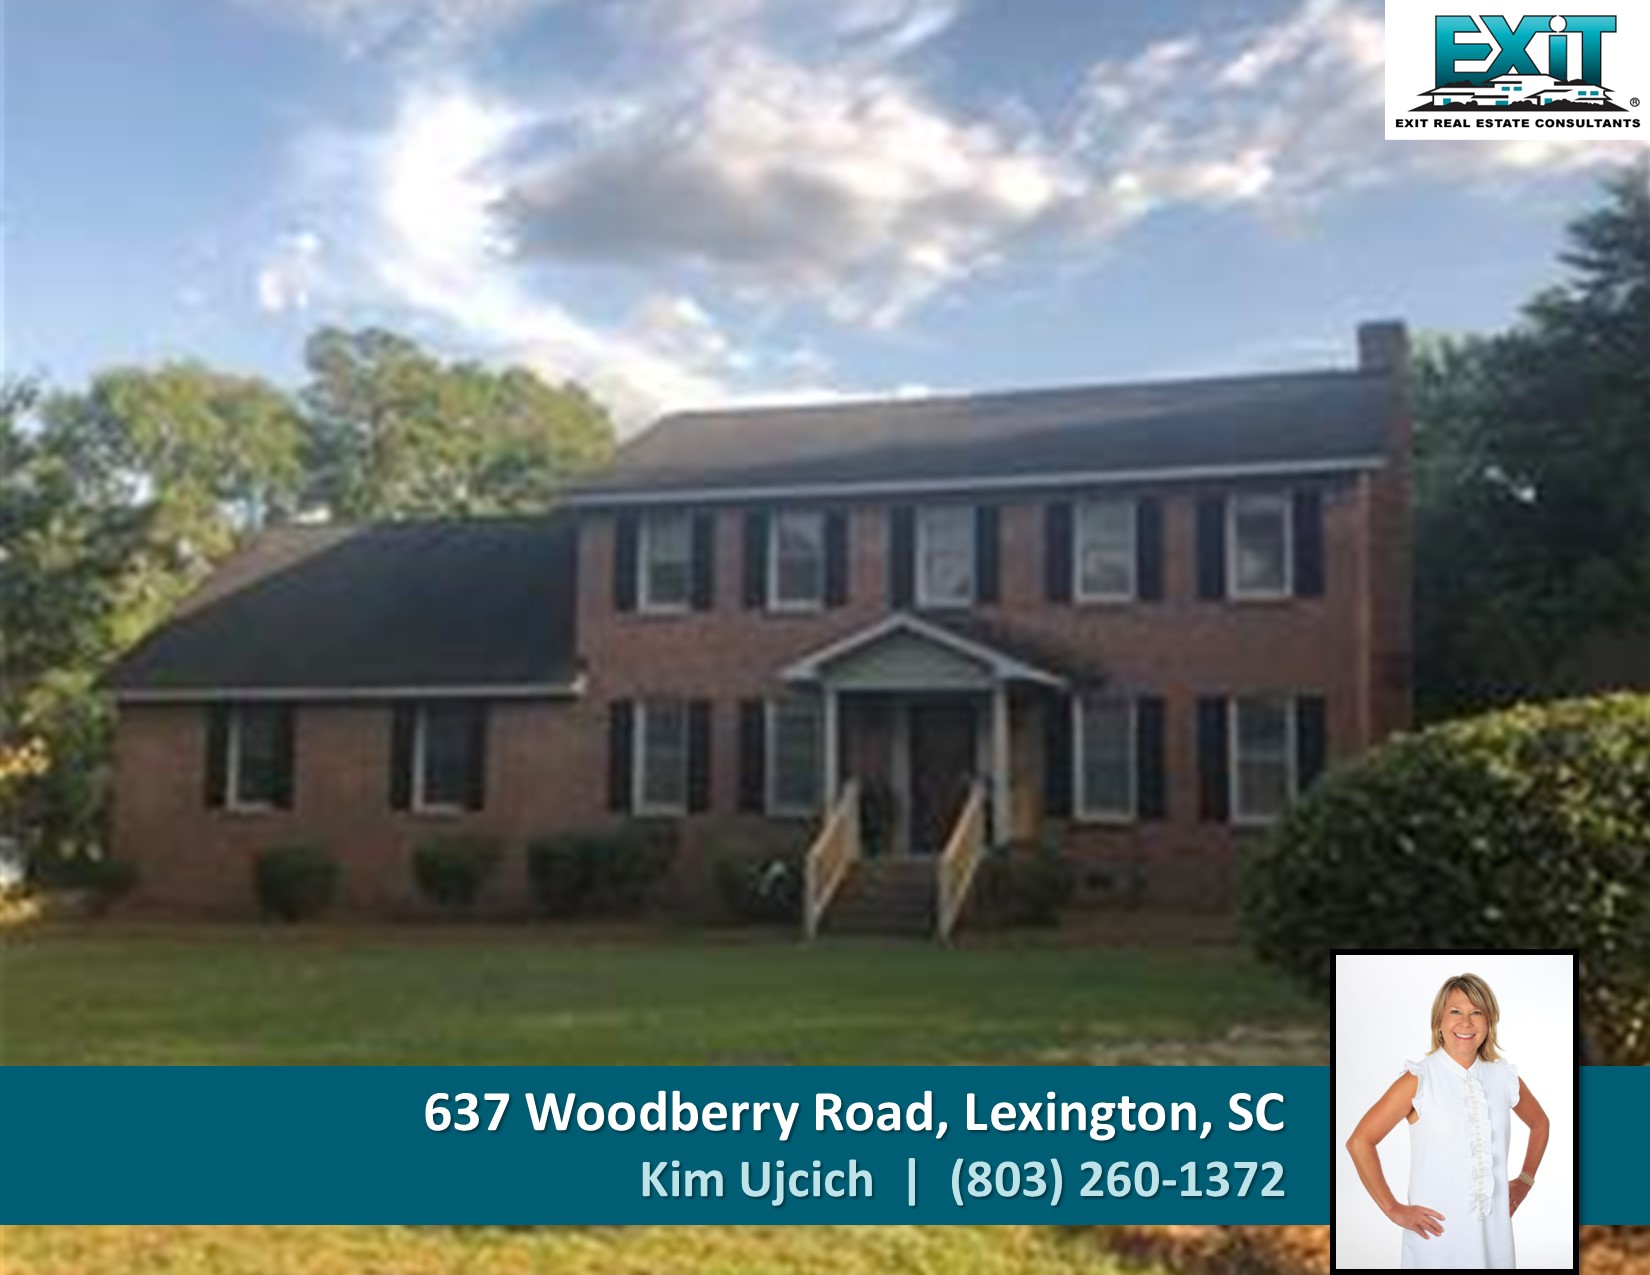 Just listed in Lexington SC!